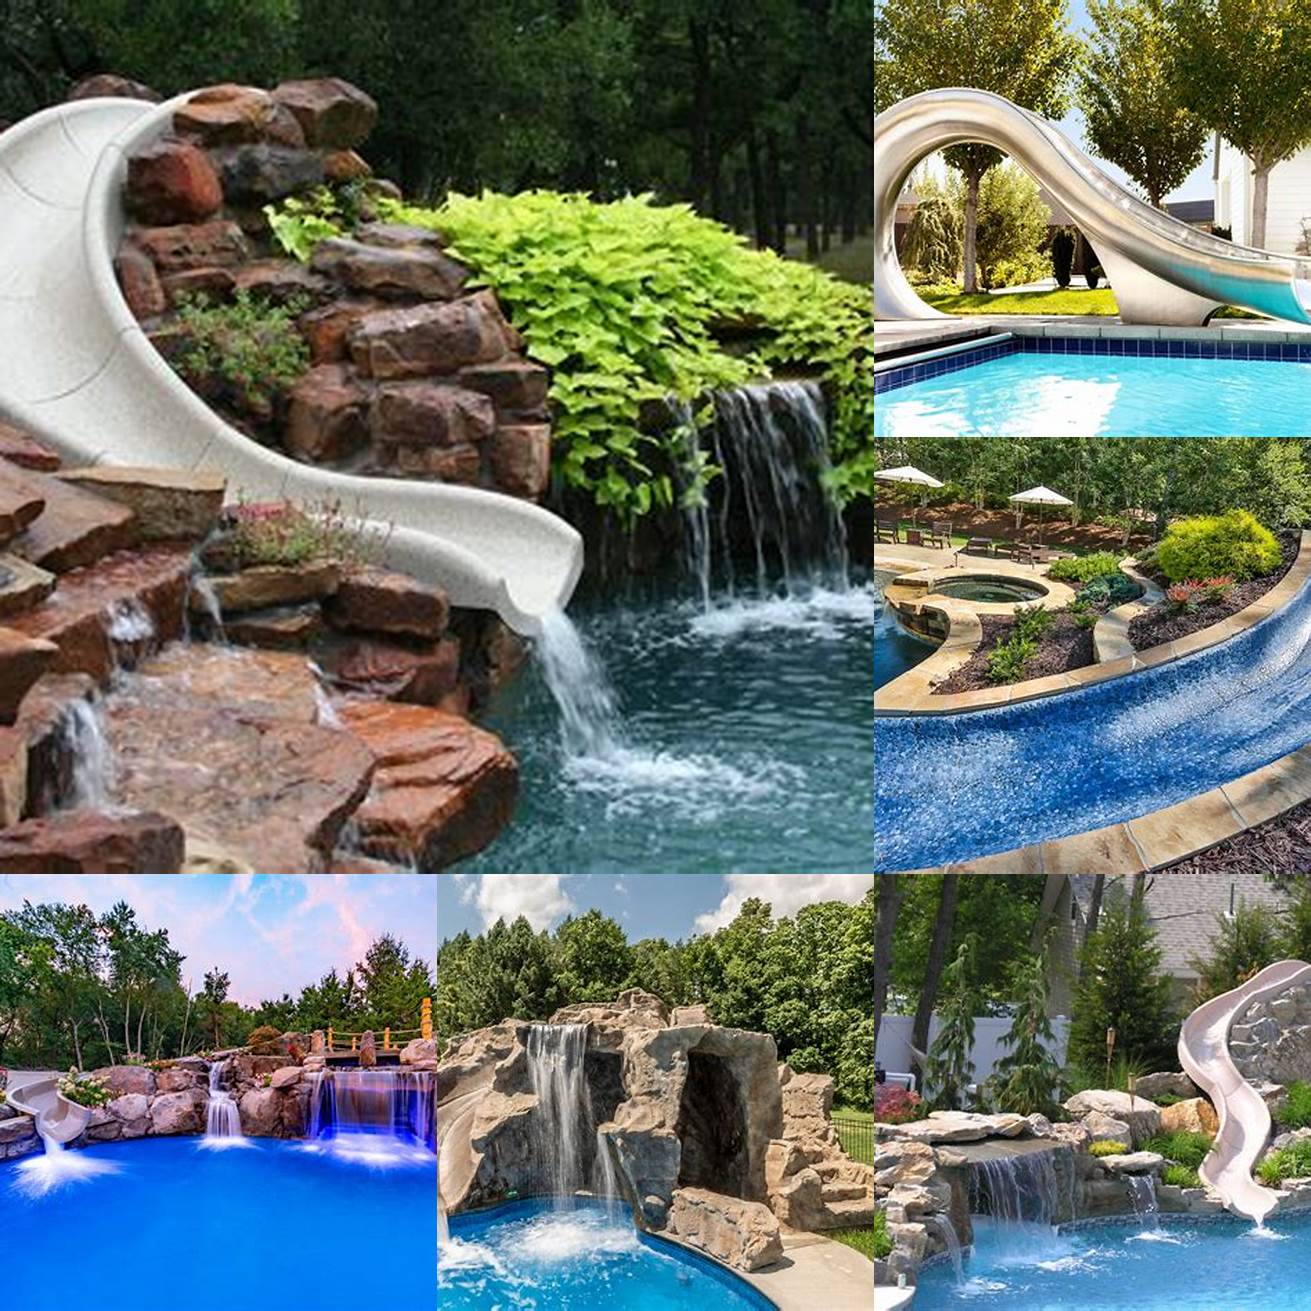 6 Outdoor Slide with Pool or Water Feature